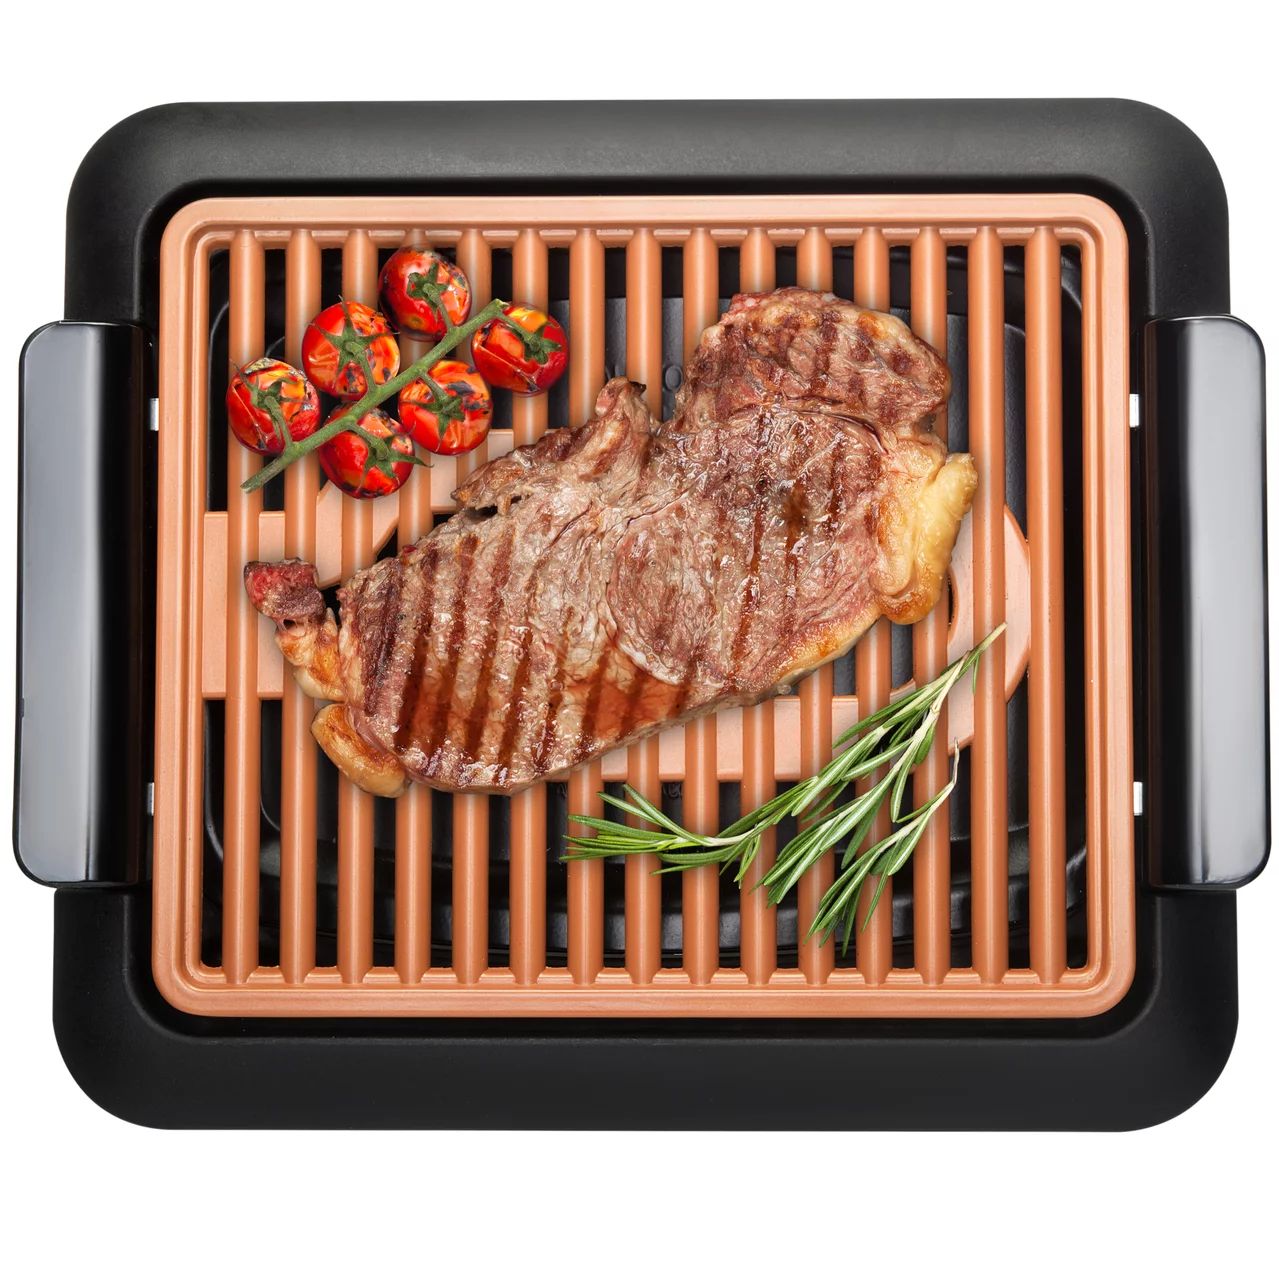 Gotham Steel Smokeless Indoor Grill, Ultra Nonstick Electric Grill, Dishwasher Safe Surface, Temp... | Walmart (US)